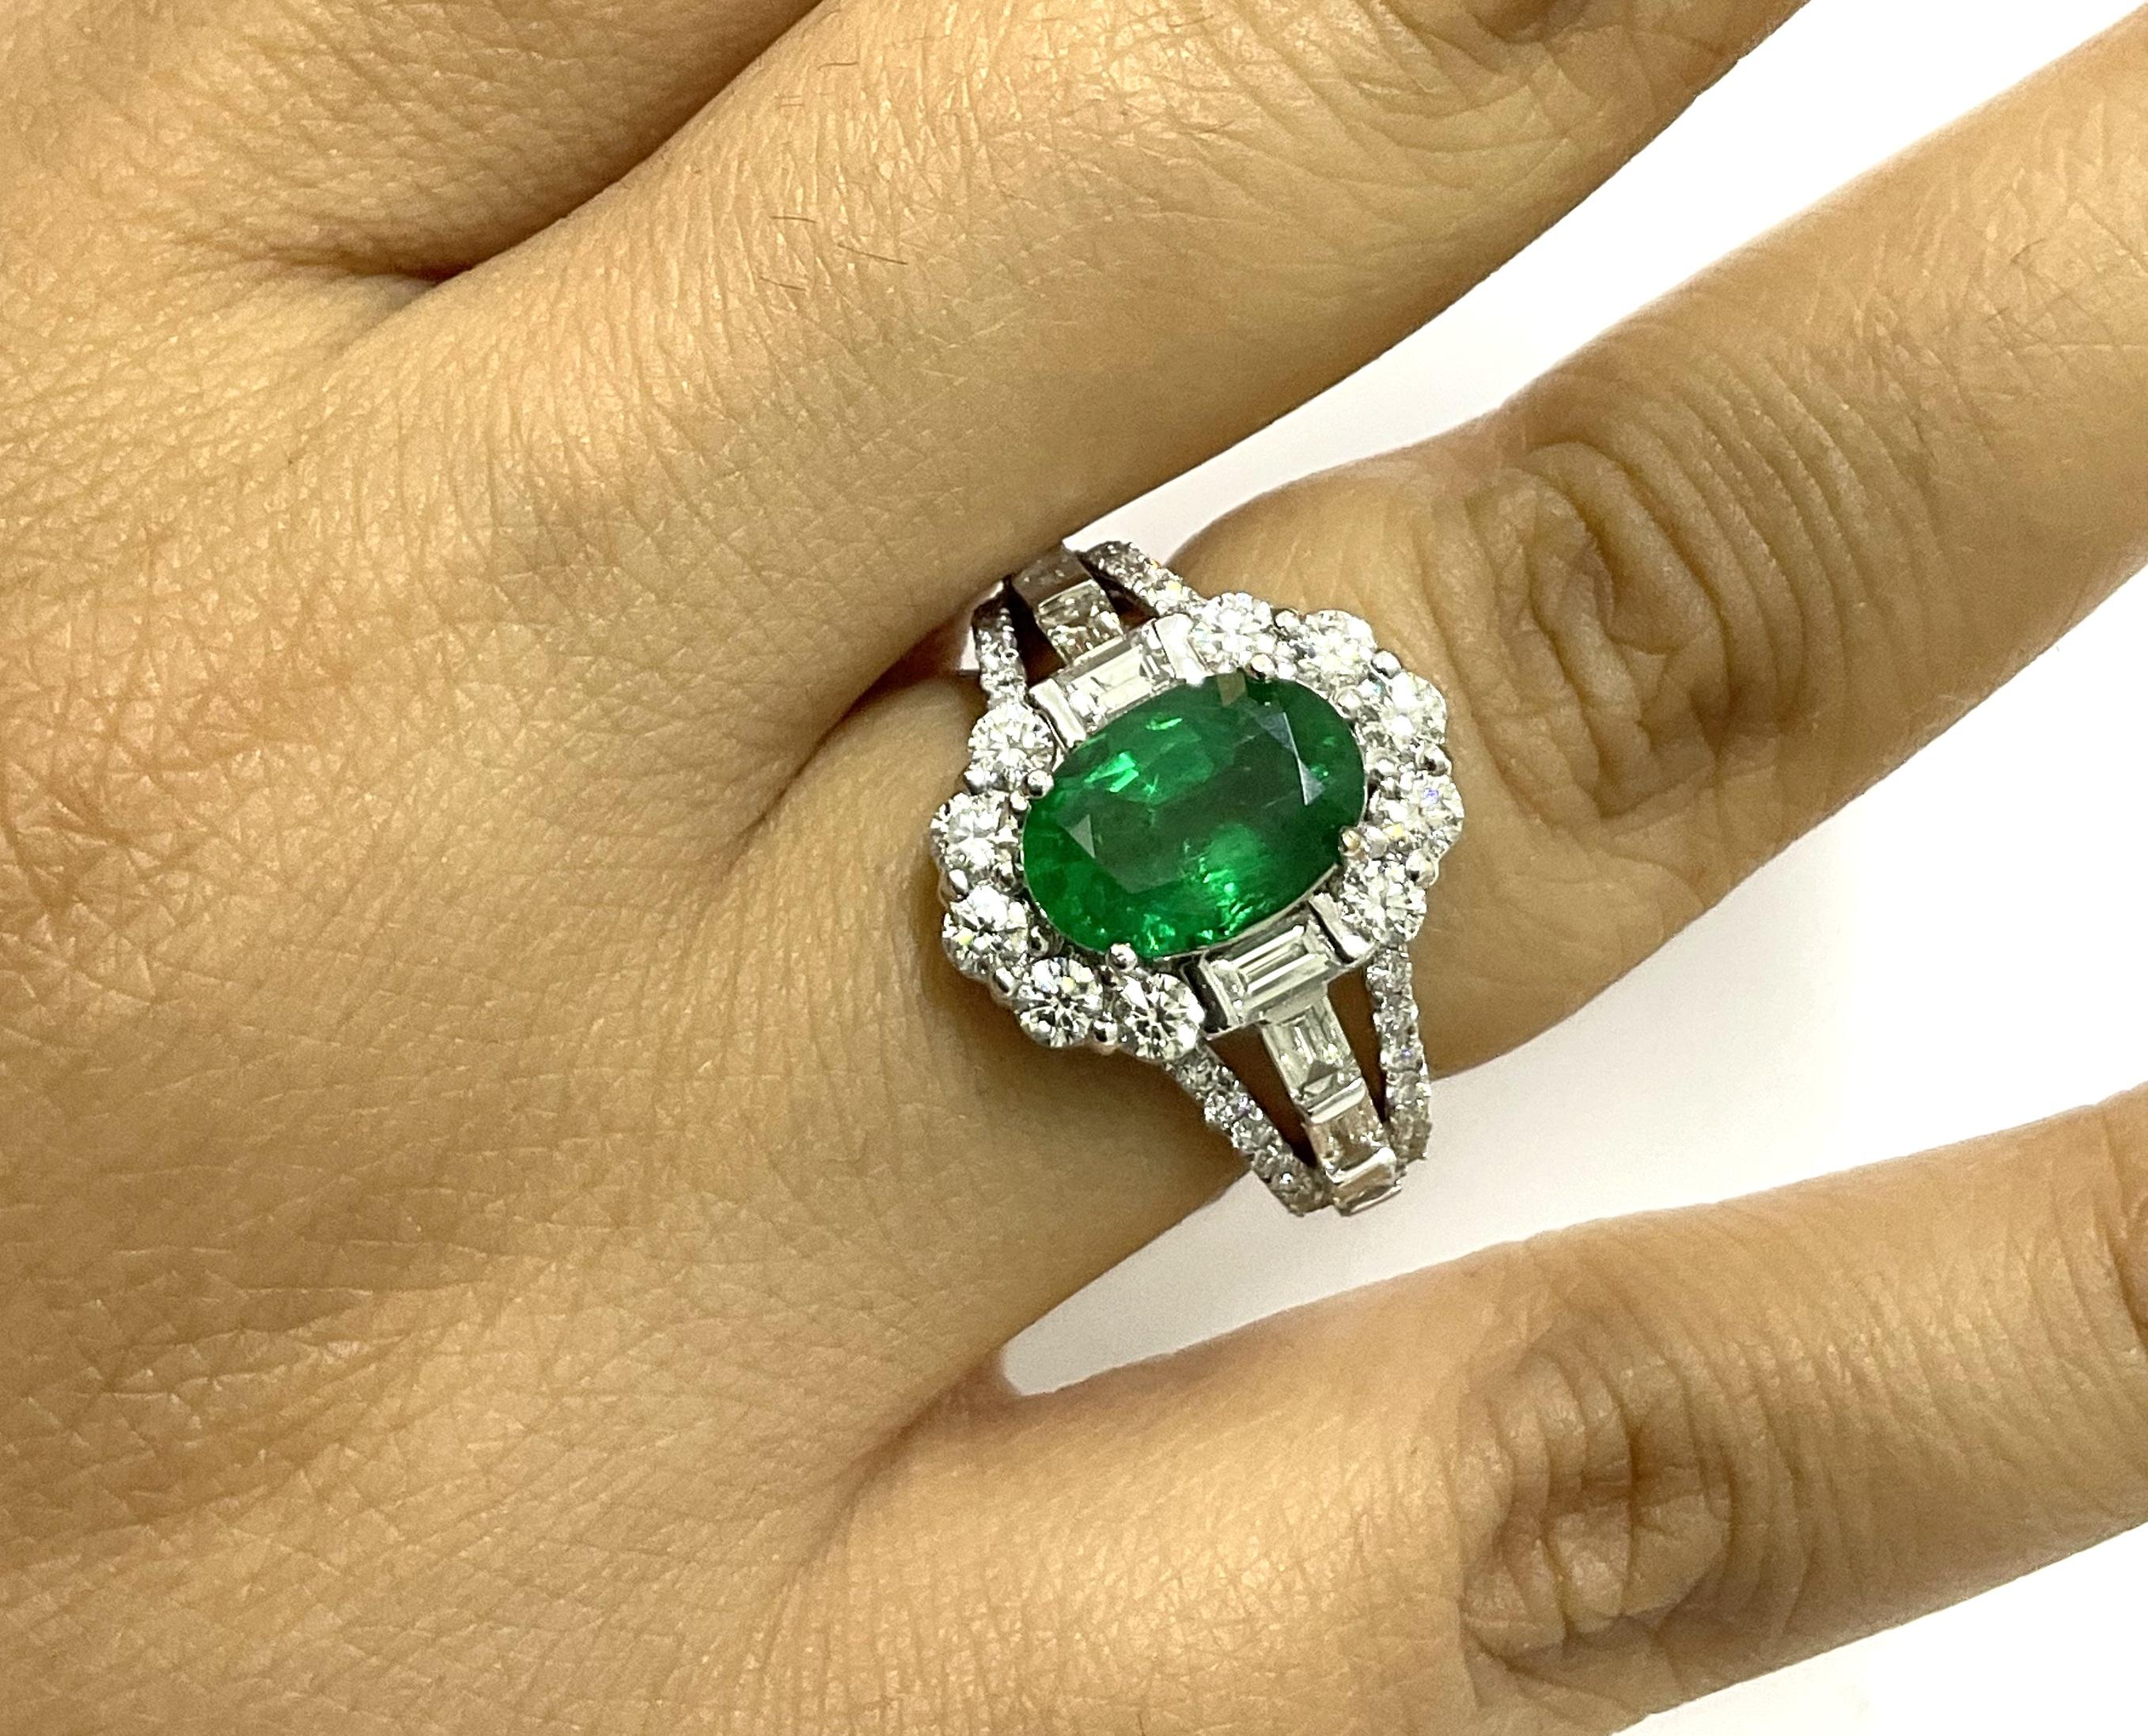 18k Gold Art Deco Zambian Emerald Cocktail Ring 2.05 cts with 1.49 ct Diamonds  For Sale 7